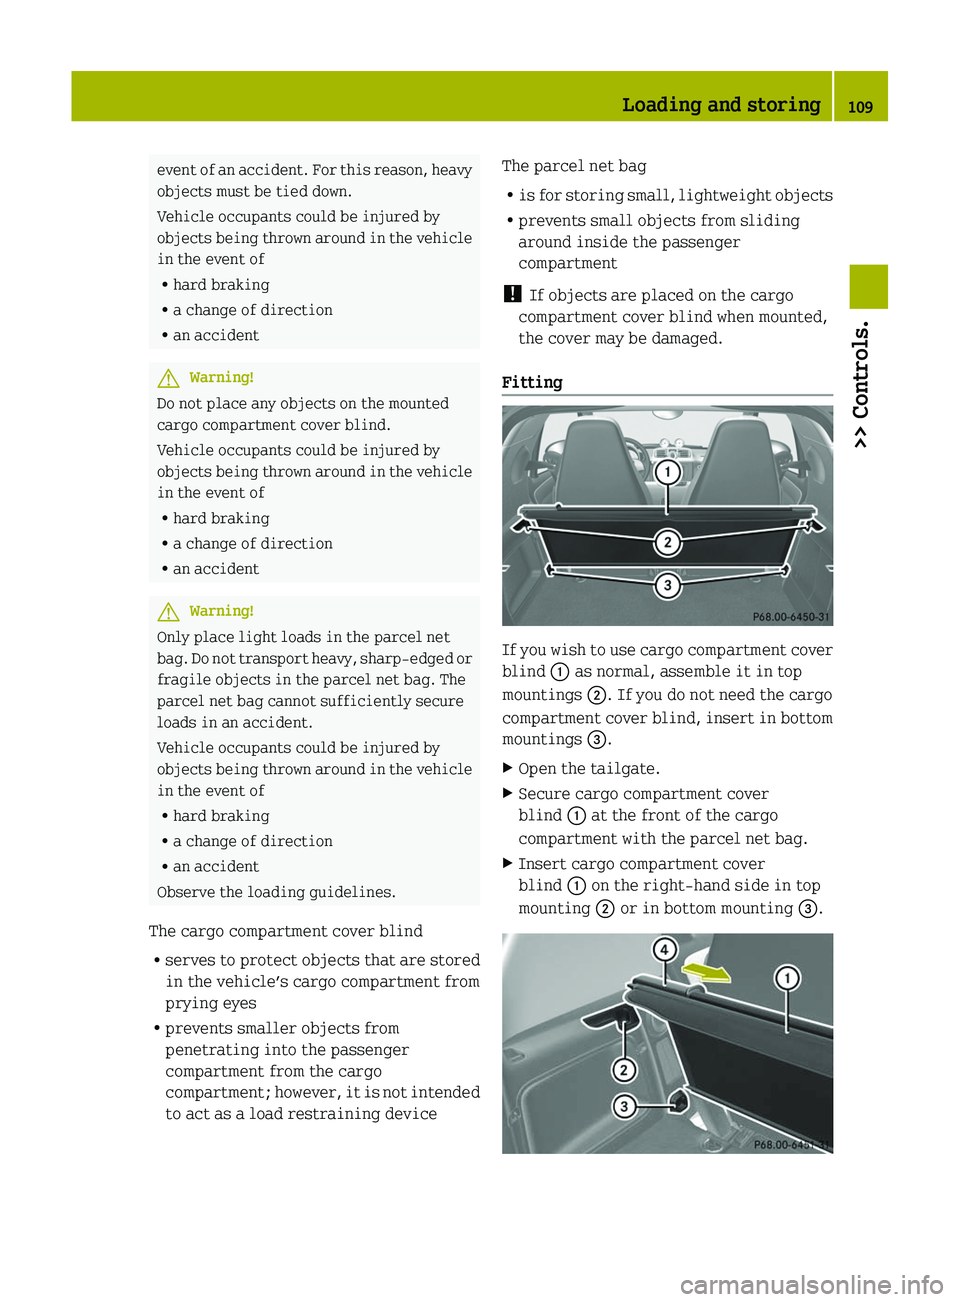 SMART FORTWO COUPE 2011  Owners Manual event of an accident. For this reason, heavy
objects must be tied down.
Vehicle occupants could be injured by
objects being thrown around in the vehicle
in the event of
Rhard braking
Ra change of dire